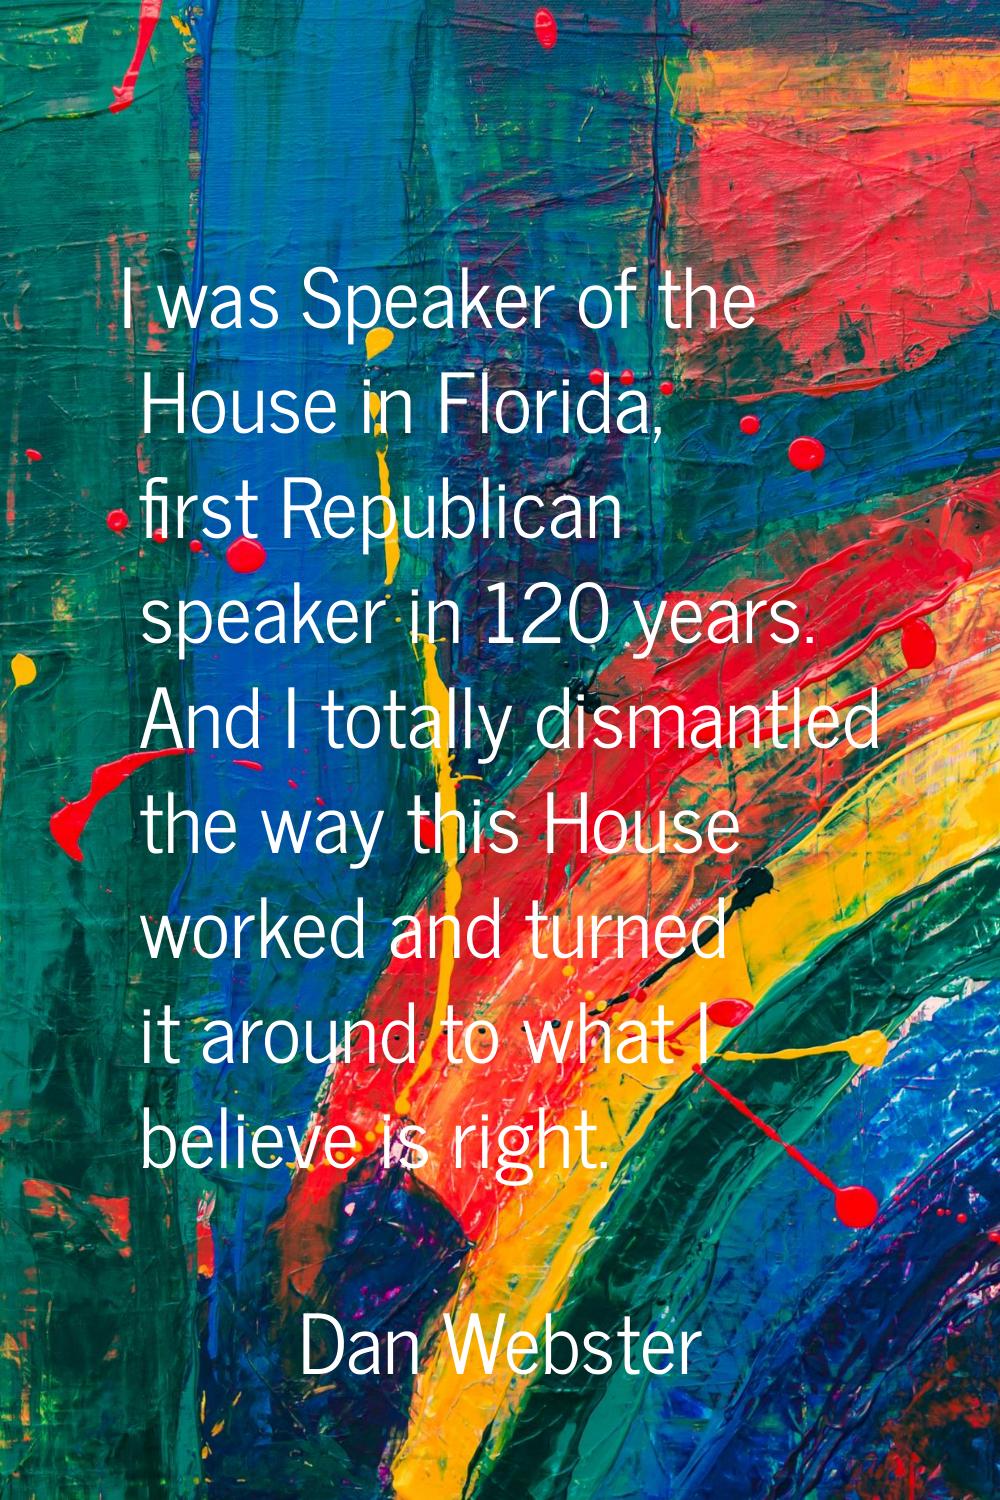 I was Speaker of the House in Florida, first Republican speaker in 120 years. And I totally dismant